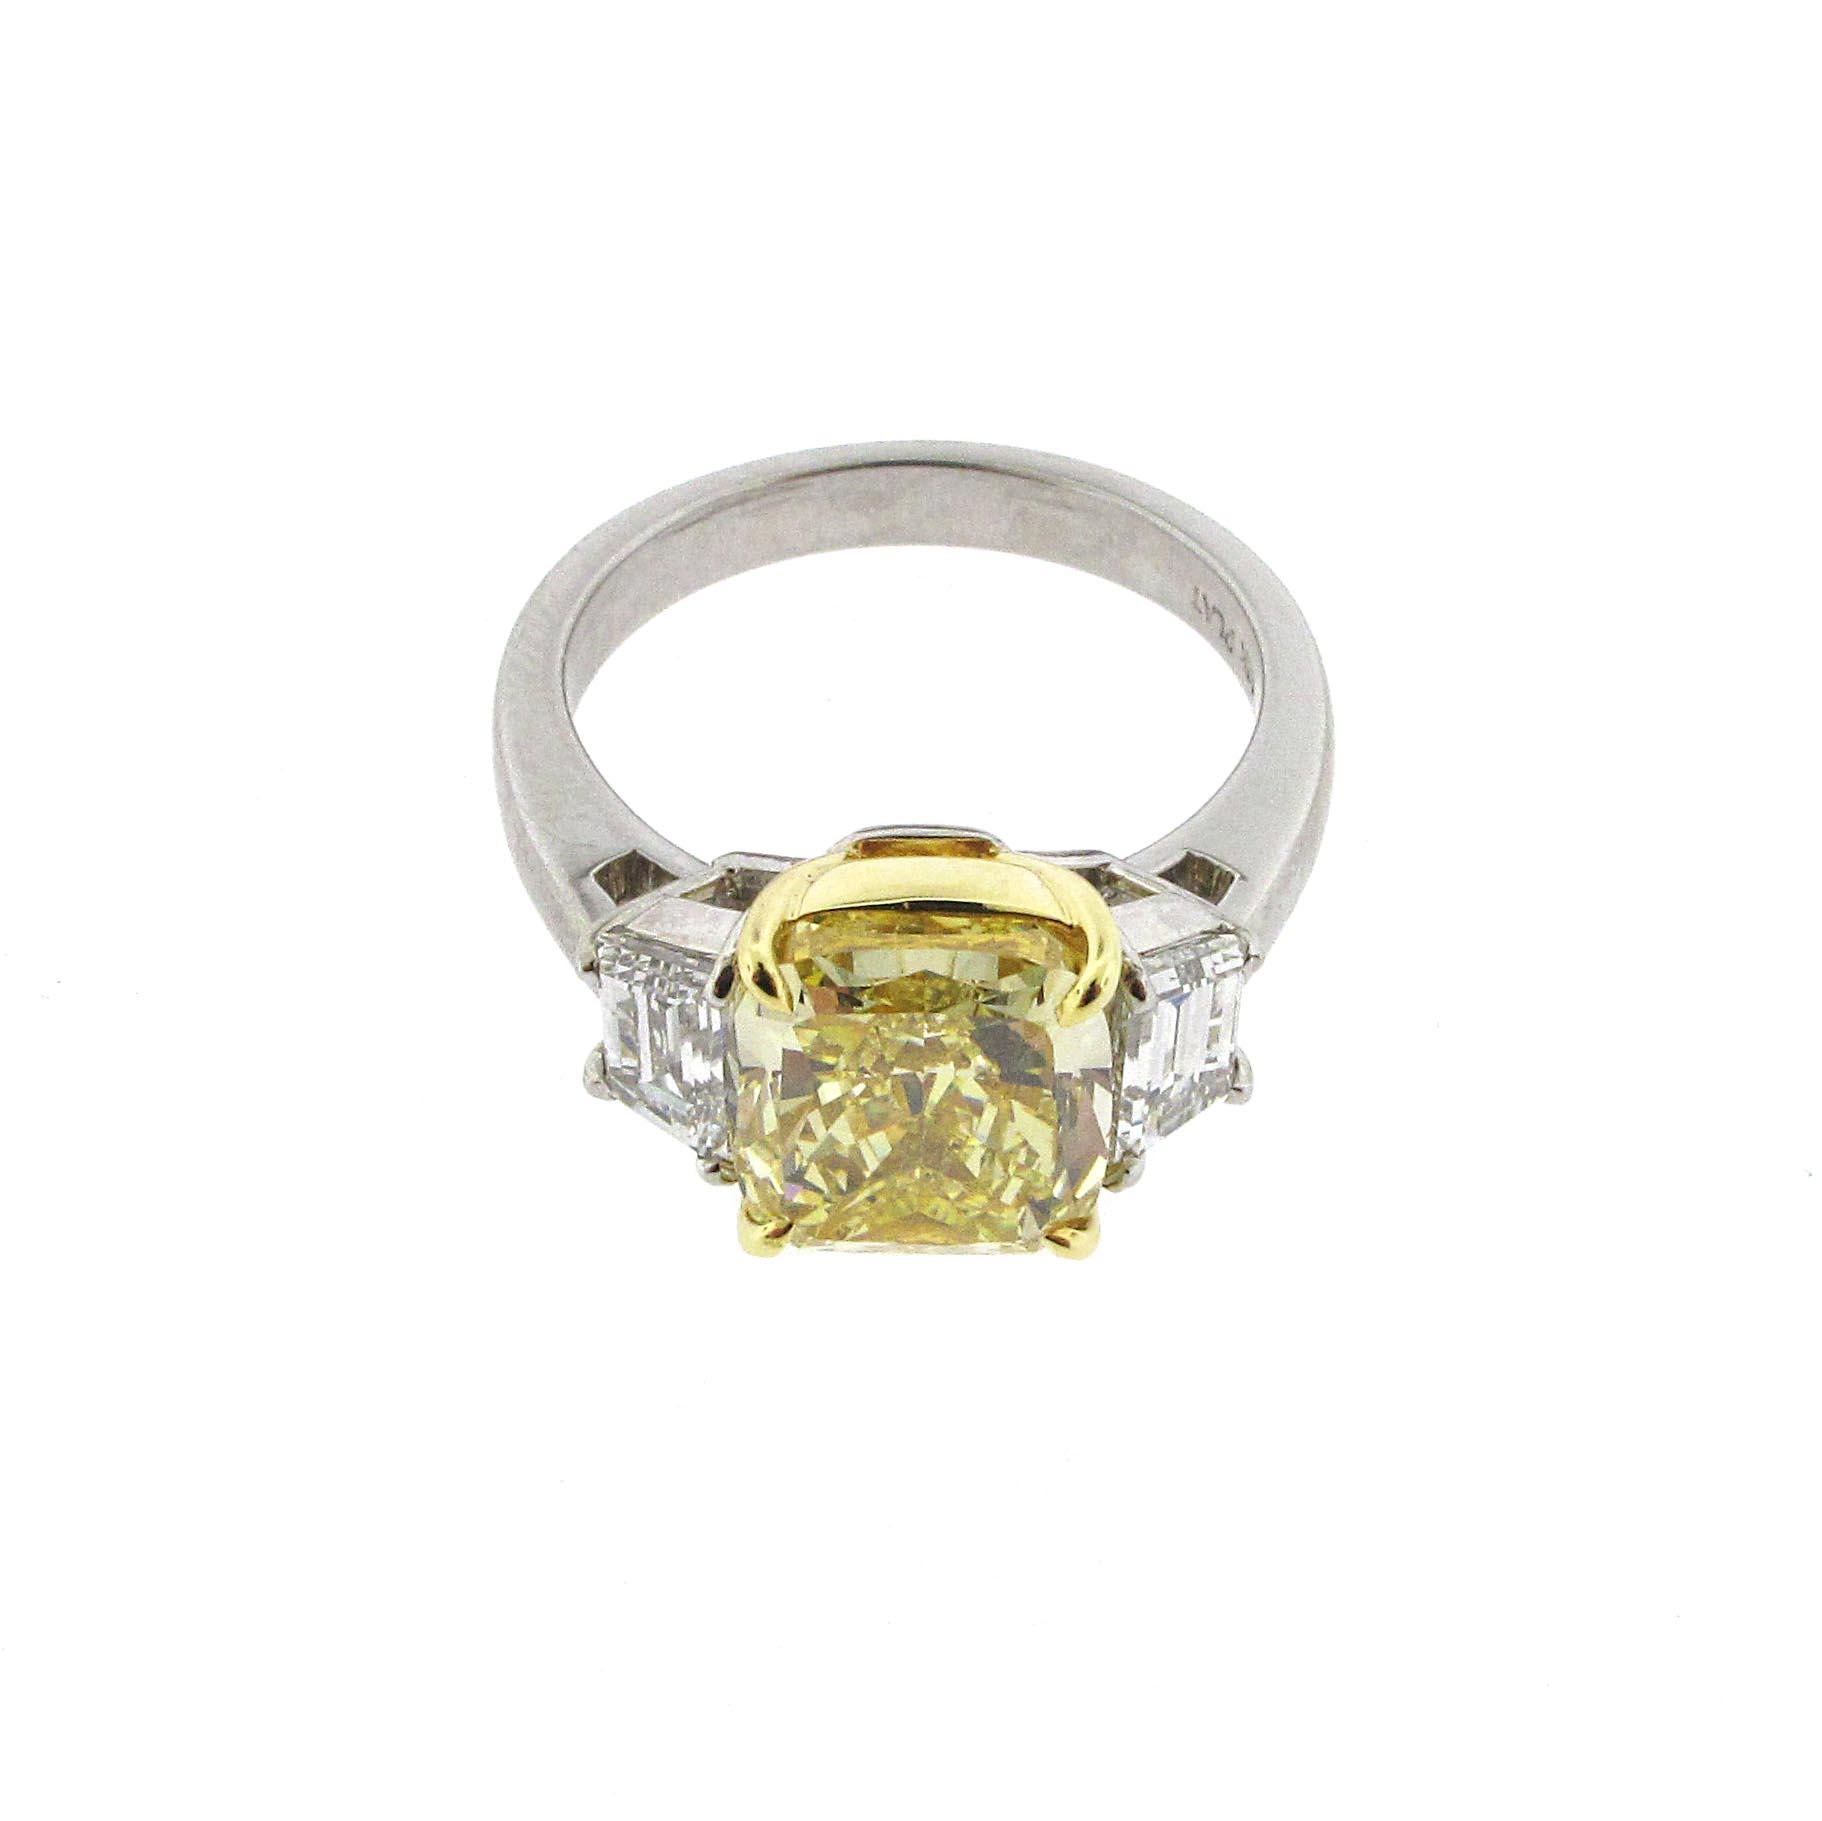 Wow!! This is a super strong Fancy Yellow cushion cut diamond ring. The center stone is 4.02 carats and looks amazing. The center stone is set between 2 trapezoid diamonds of extremely white clarity and super high clarity. The ring is platinum while